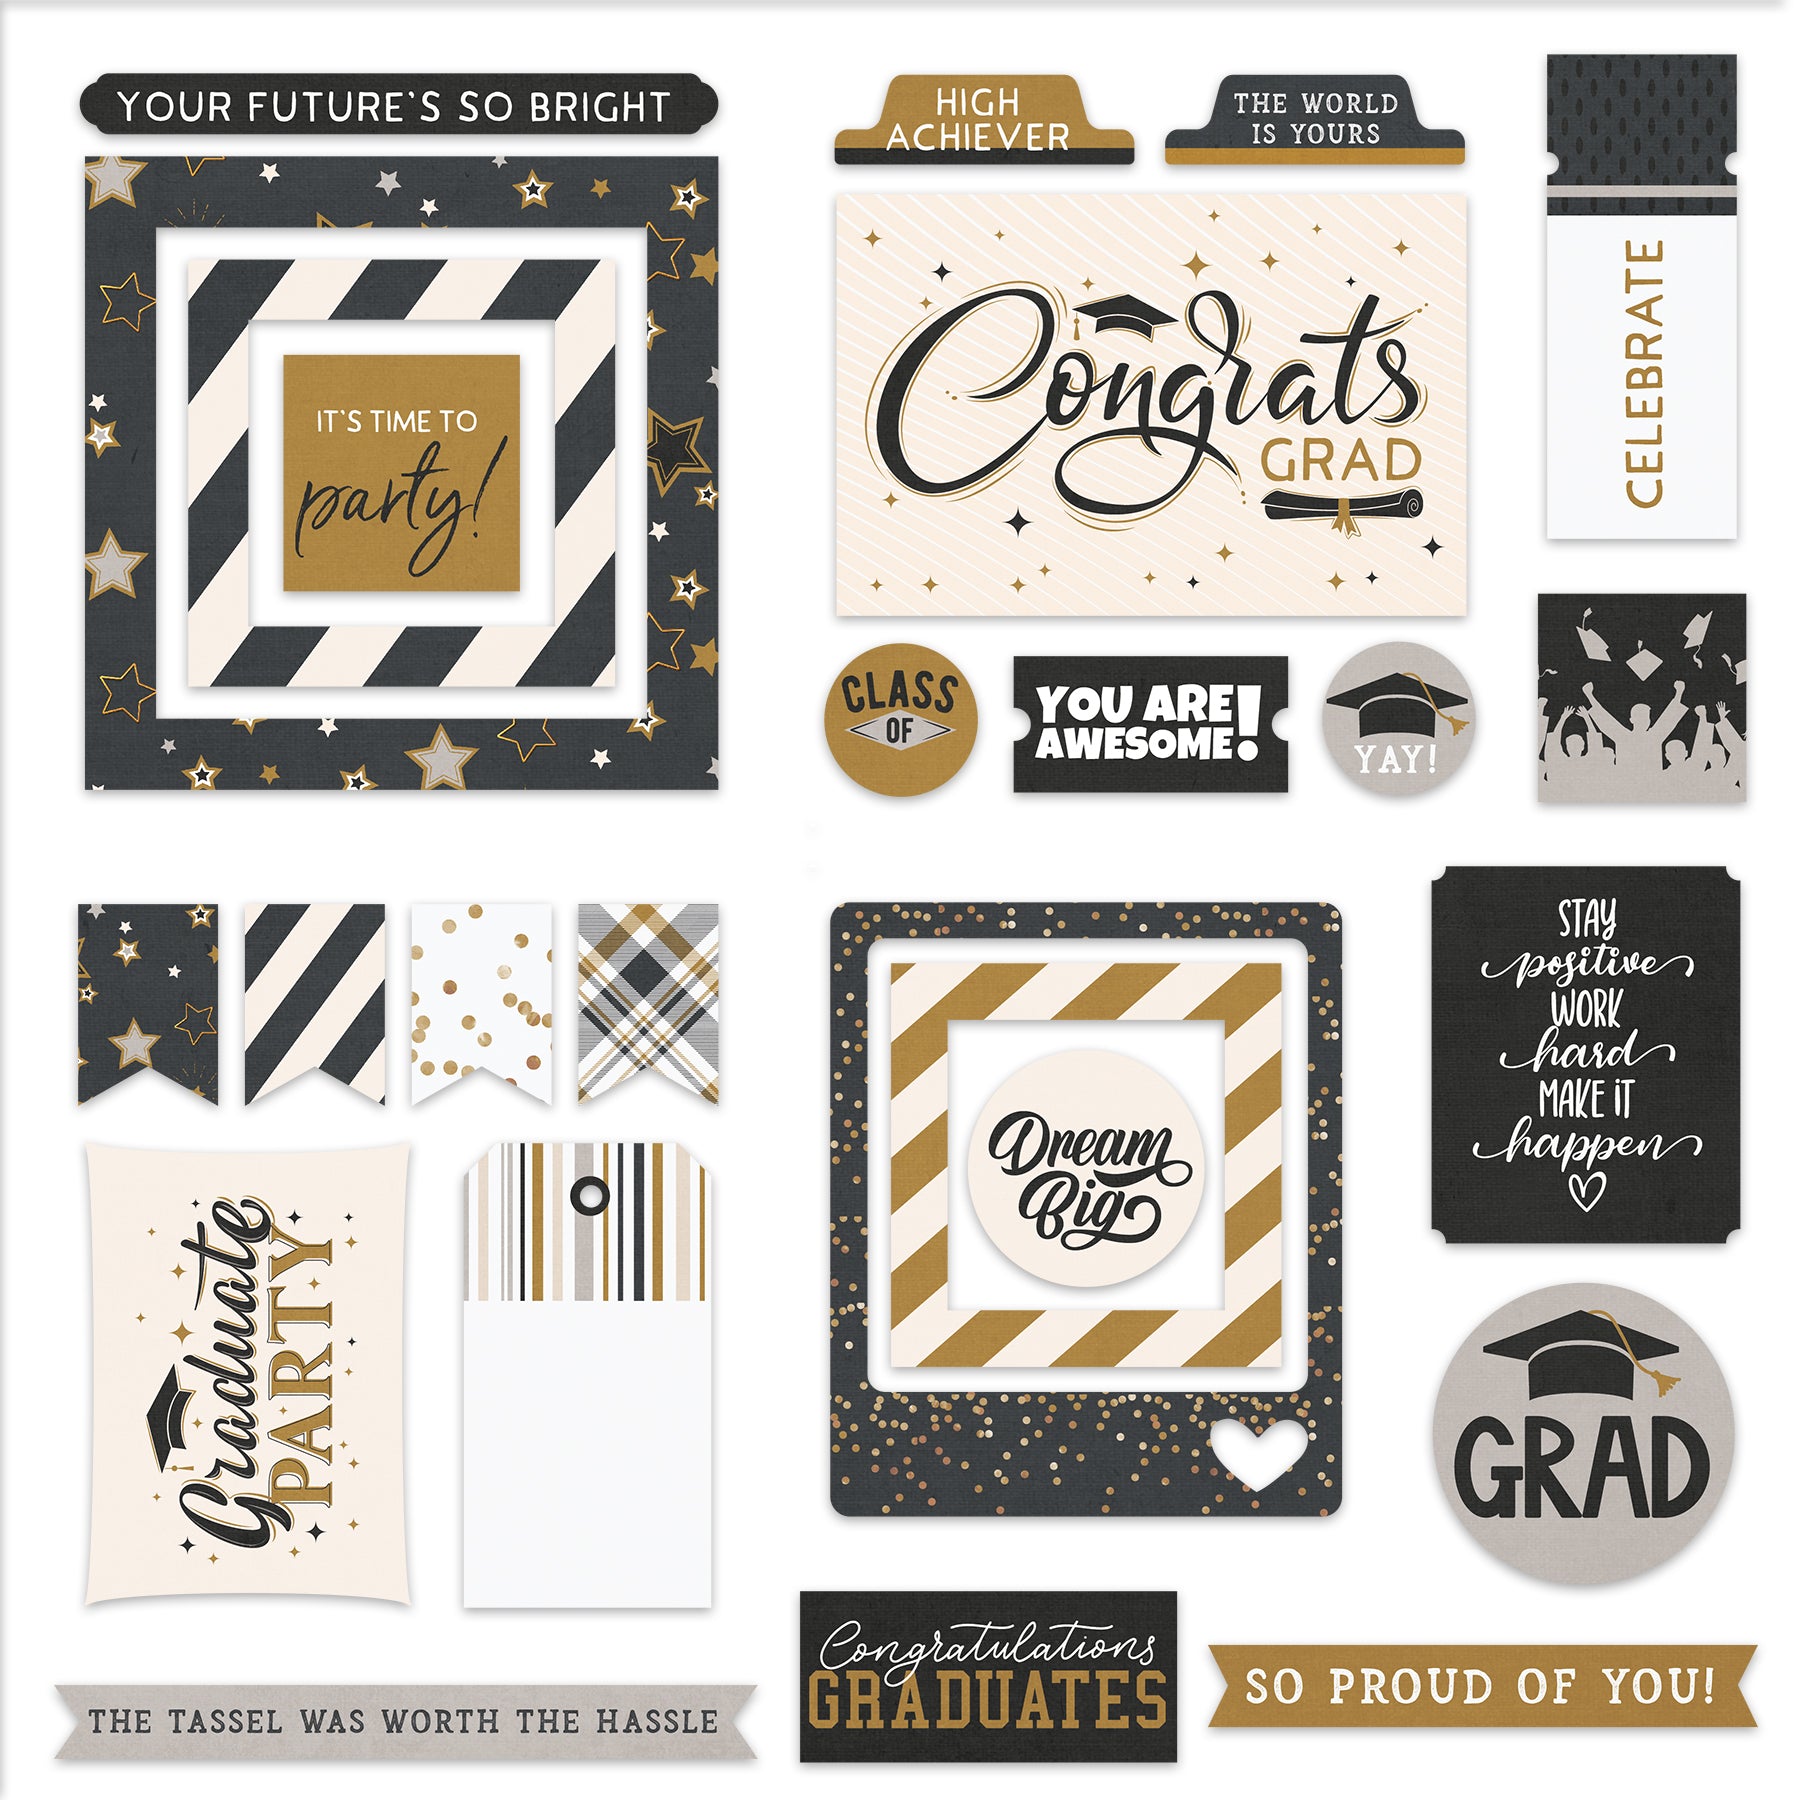 The Graduate Collection 5x5 Scrapbook Ephemera by Photo Play Paper